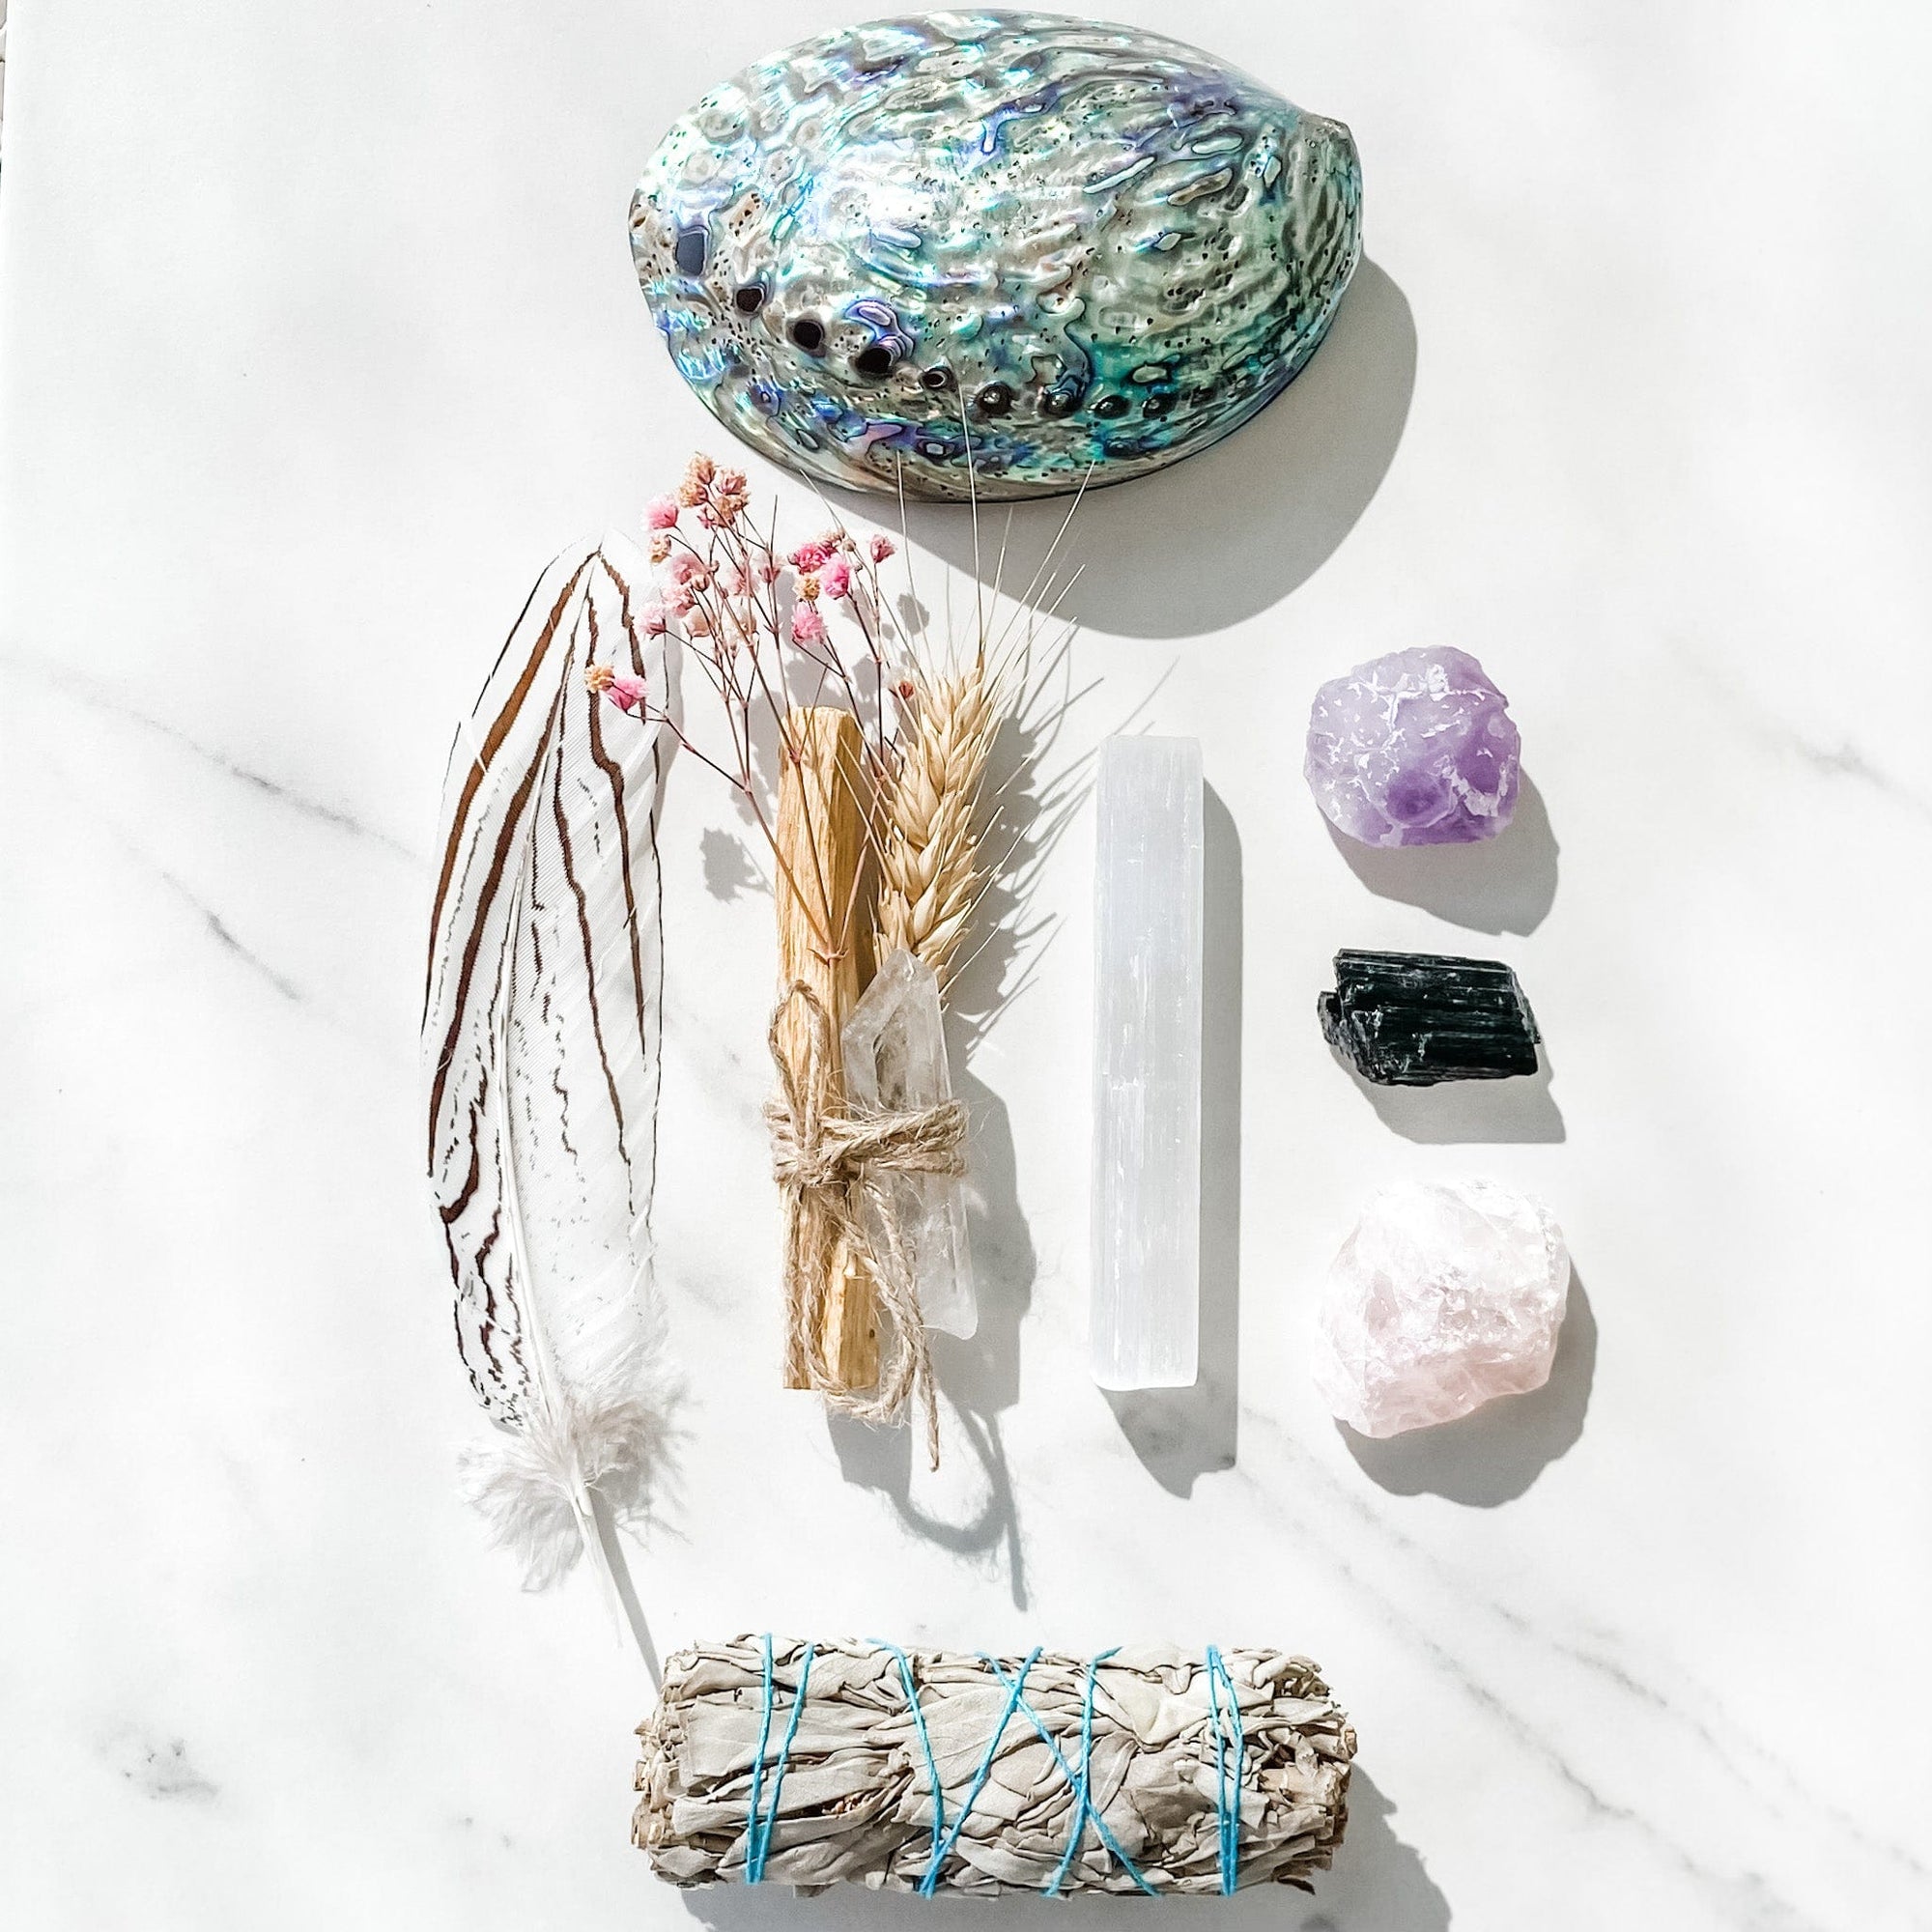 s1067 natural abalone cleansing smudging ritual crystal kit home protection eliminate negative energy crystals australia gemrox sydney 2